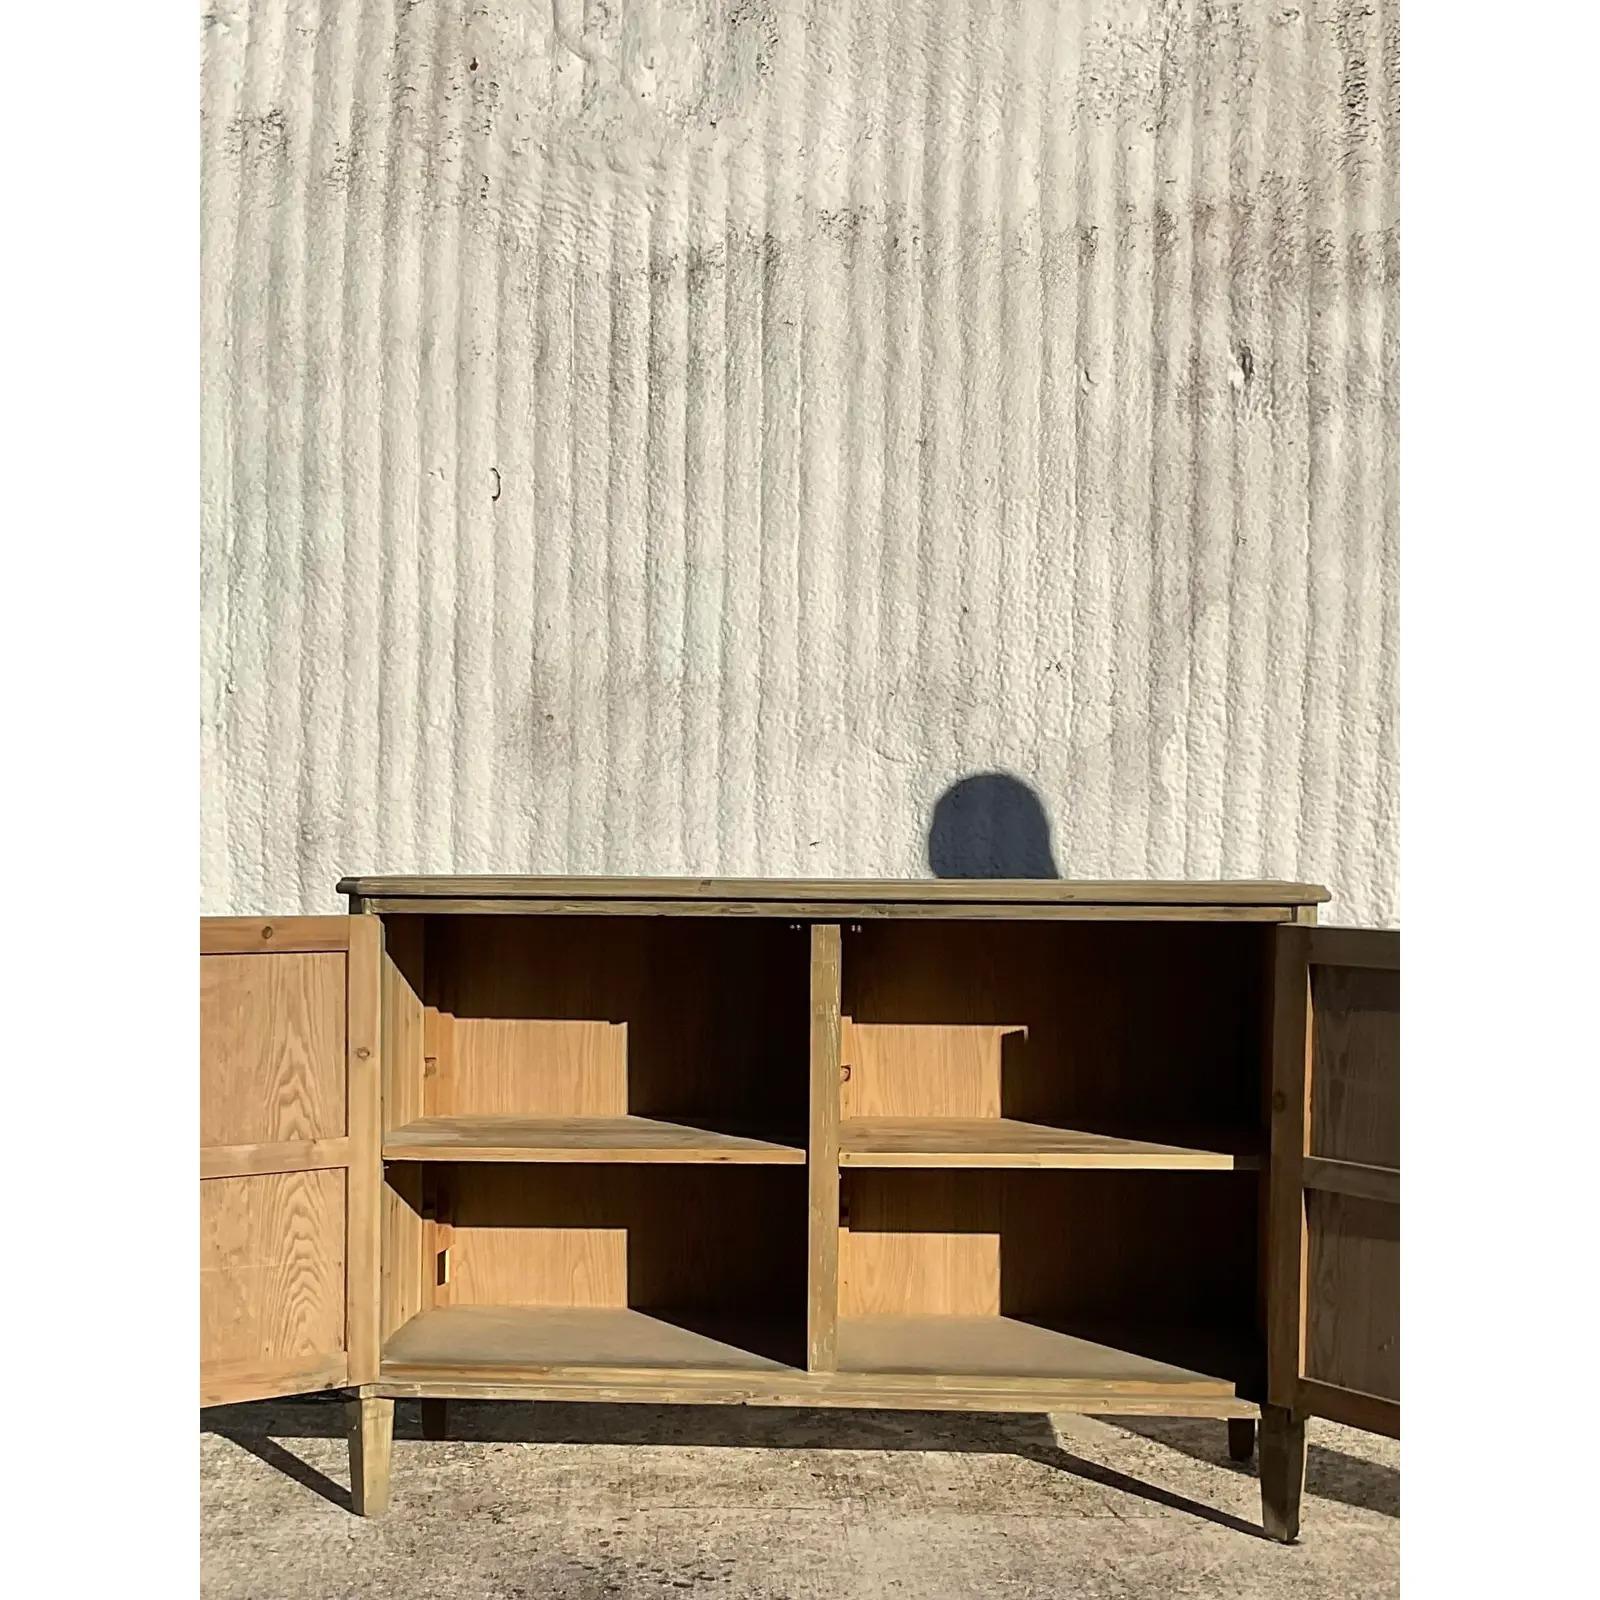 A fabulous vintage Coastal trellis credenza. A gorgeous cerused pine in a chic tall cabinet. Lots of great storage below with adjustable shelves. Acquired from a Palm Beach estate.